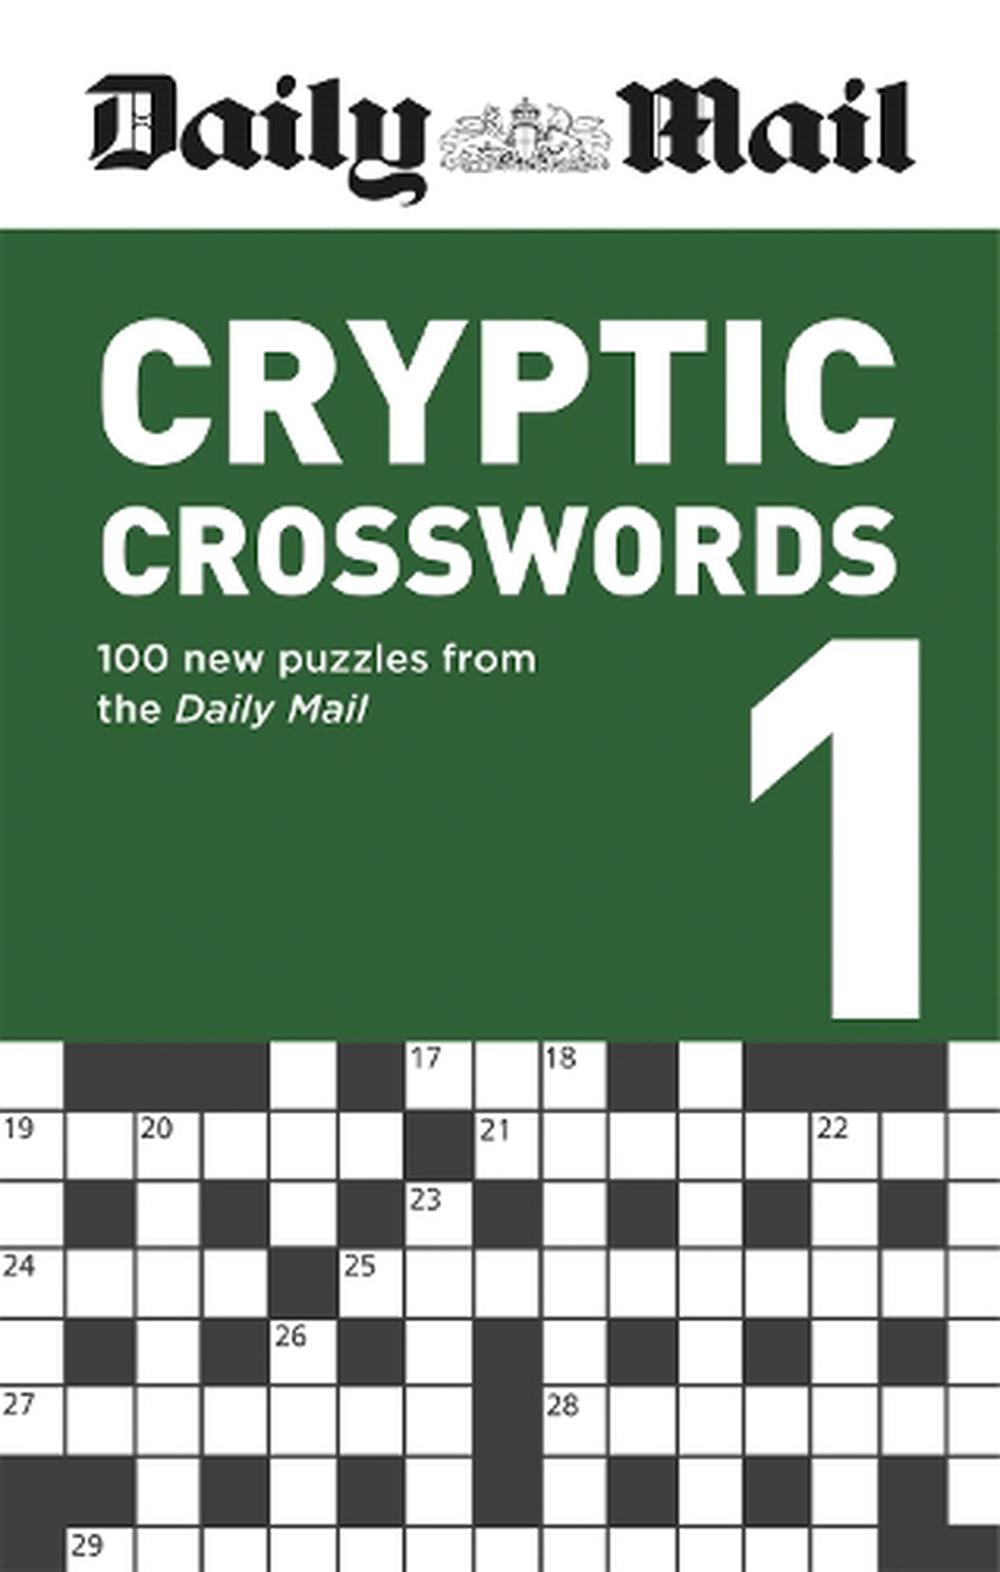 Daily Mail Cryptic Crosswords Volume 1 by Daily Mail (English